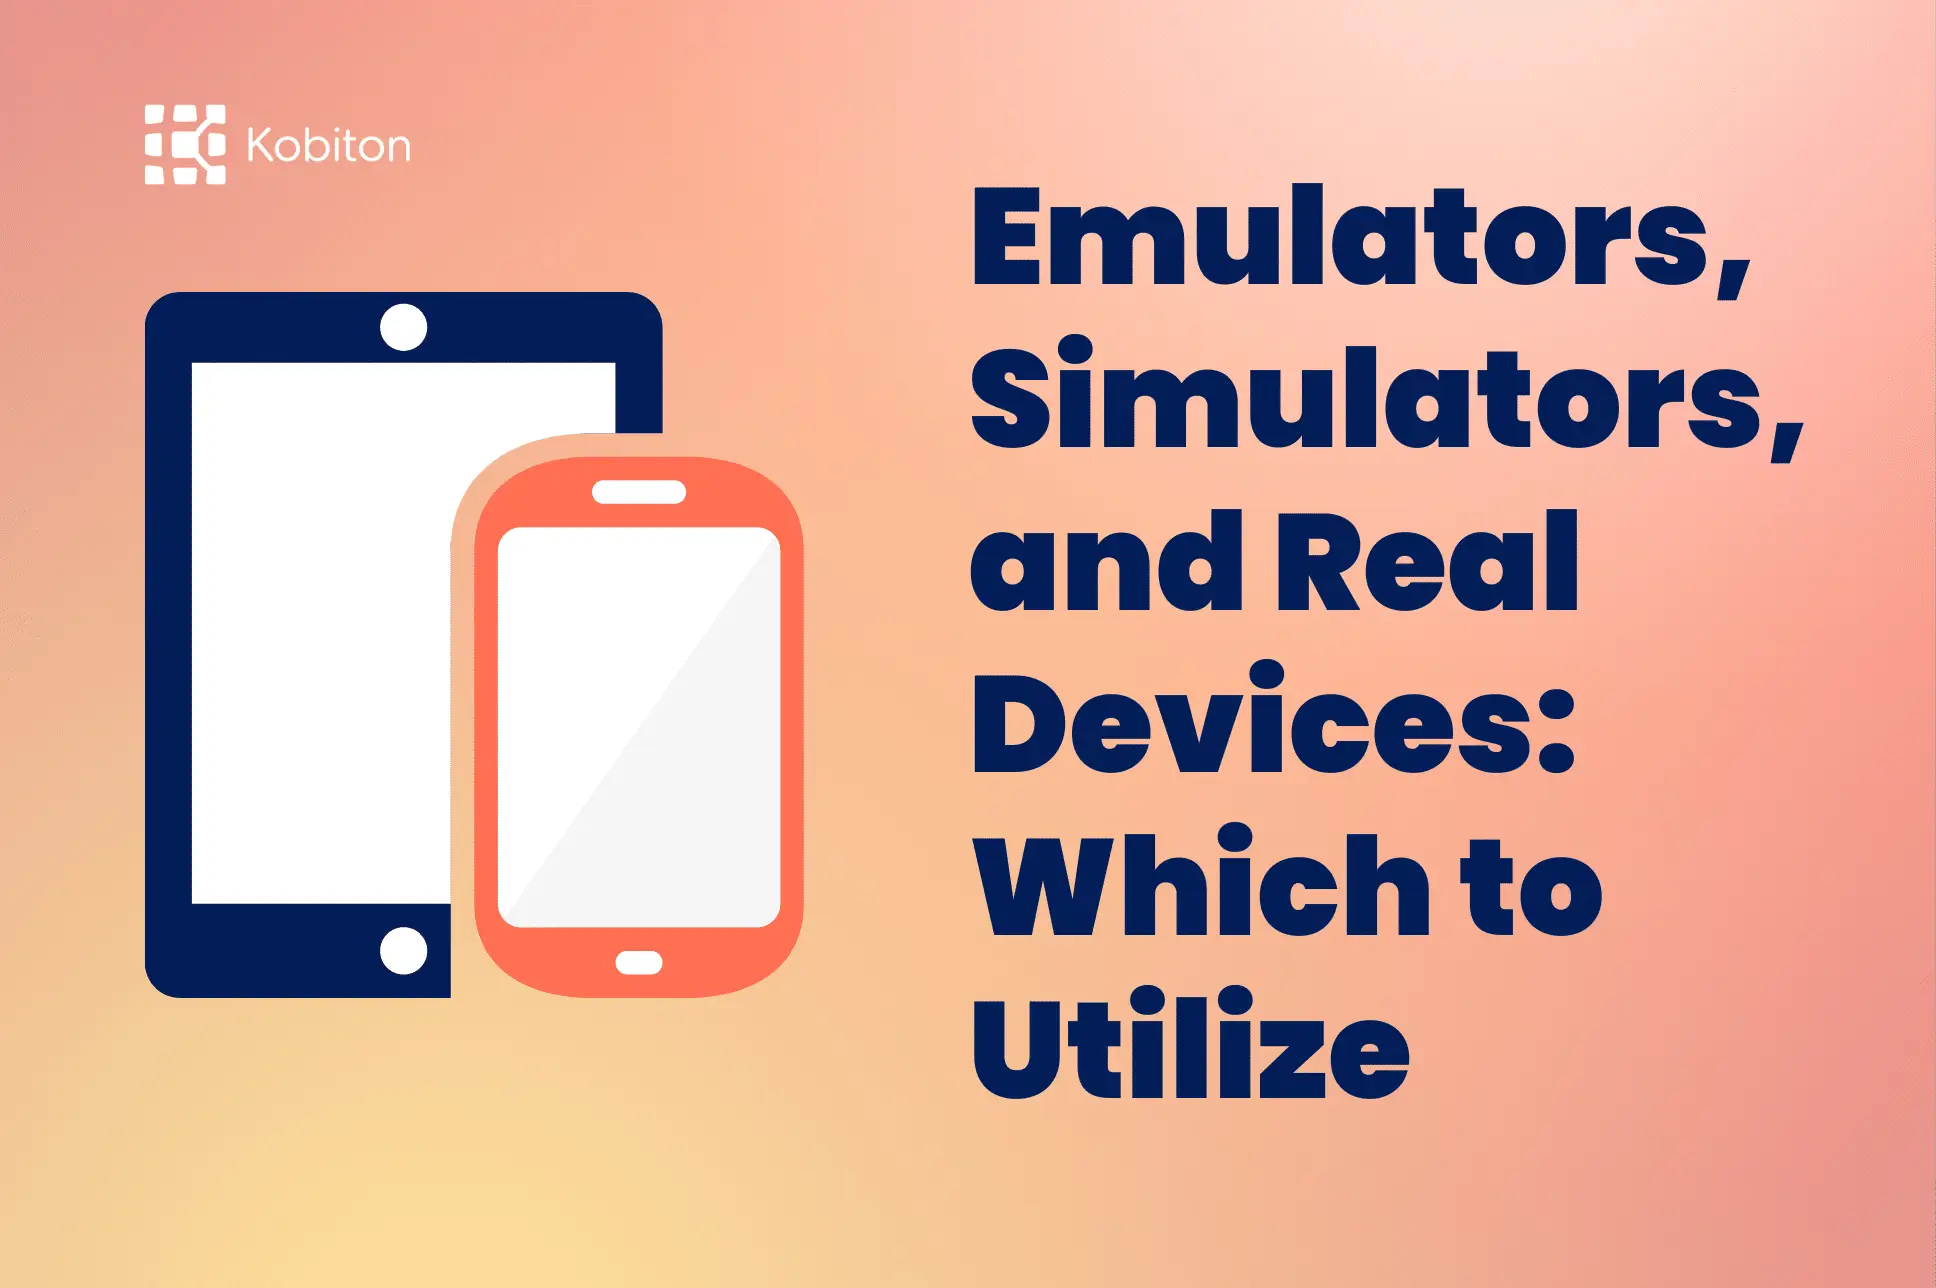 Emulators, Simulators, and Real Devices: Which to Utilize